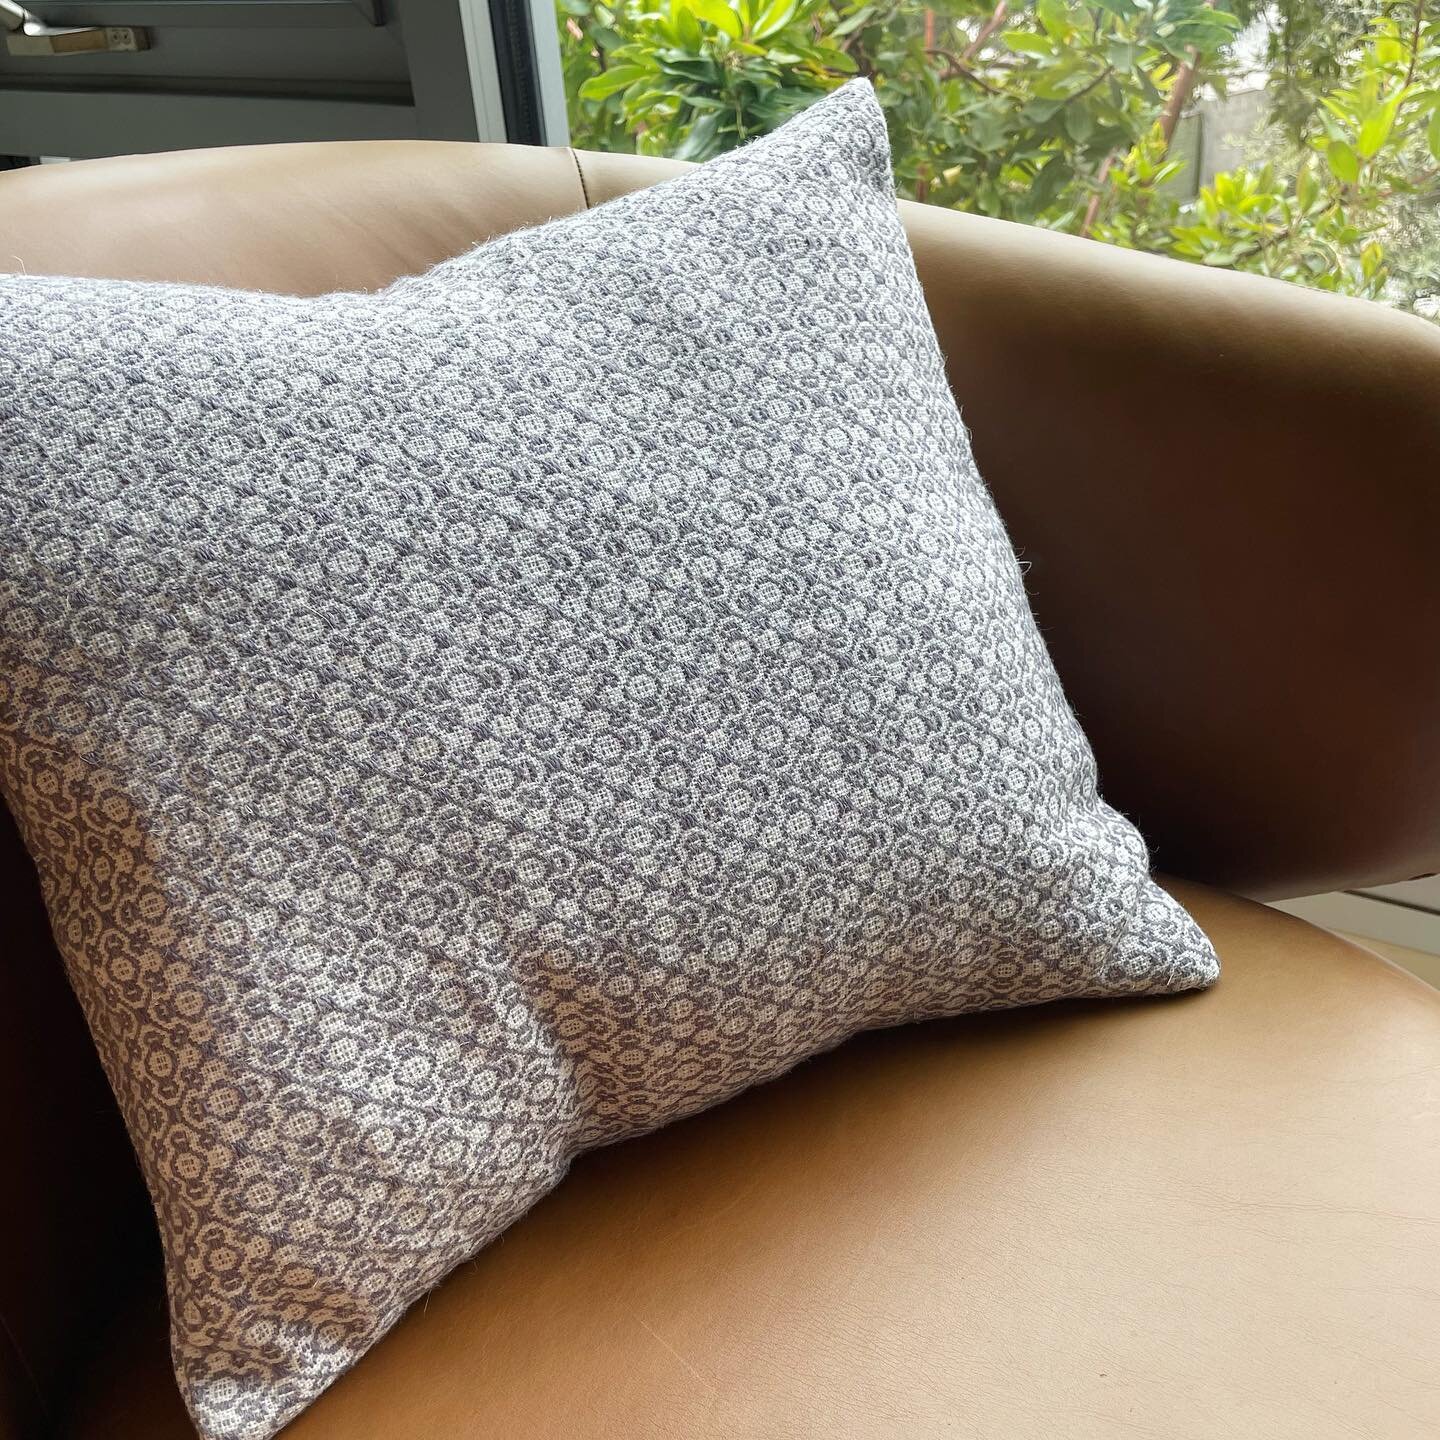 Handwoven overshot pillow cover 💜
.
.
.
{Description: a pillow with a geometric pattern in lavender wool on an off-white linen background sits on a brown leather chair with green leaves visible out a window in the background.}
.
.
.
#Weaving #Weaver